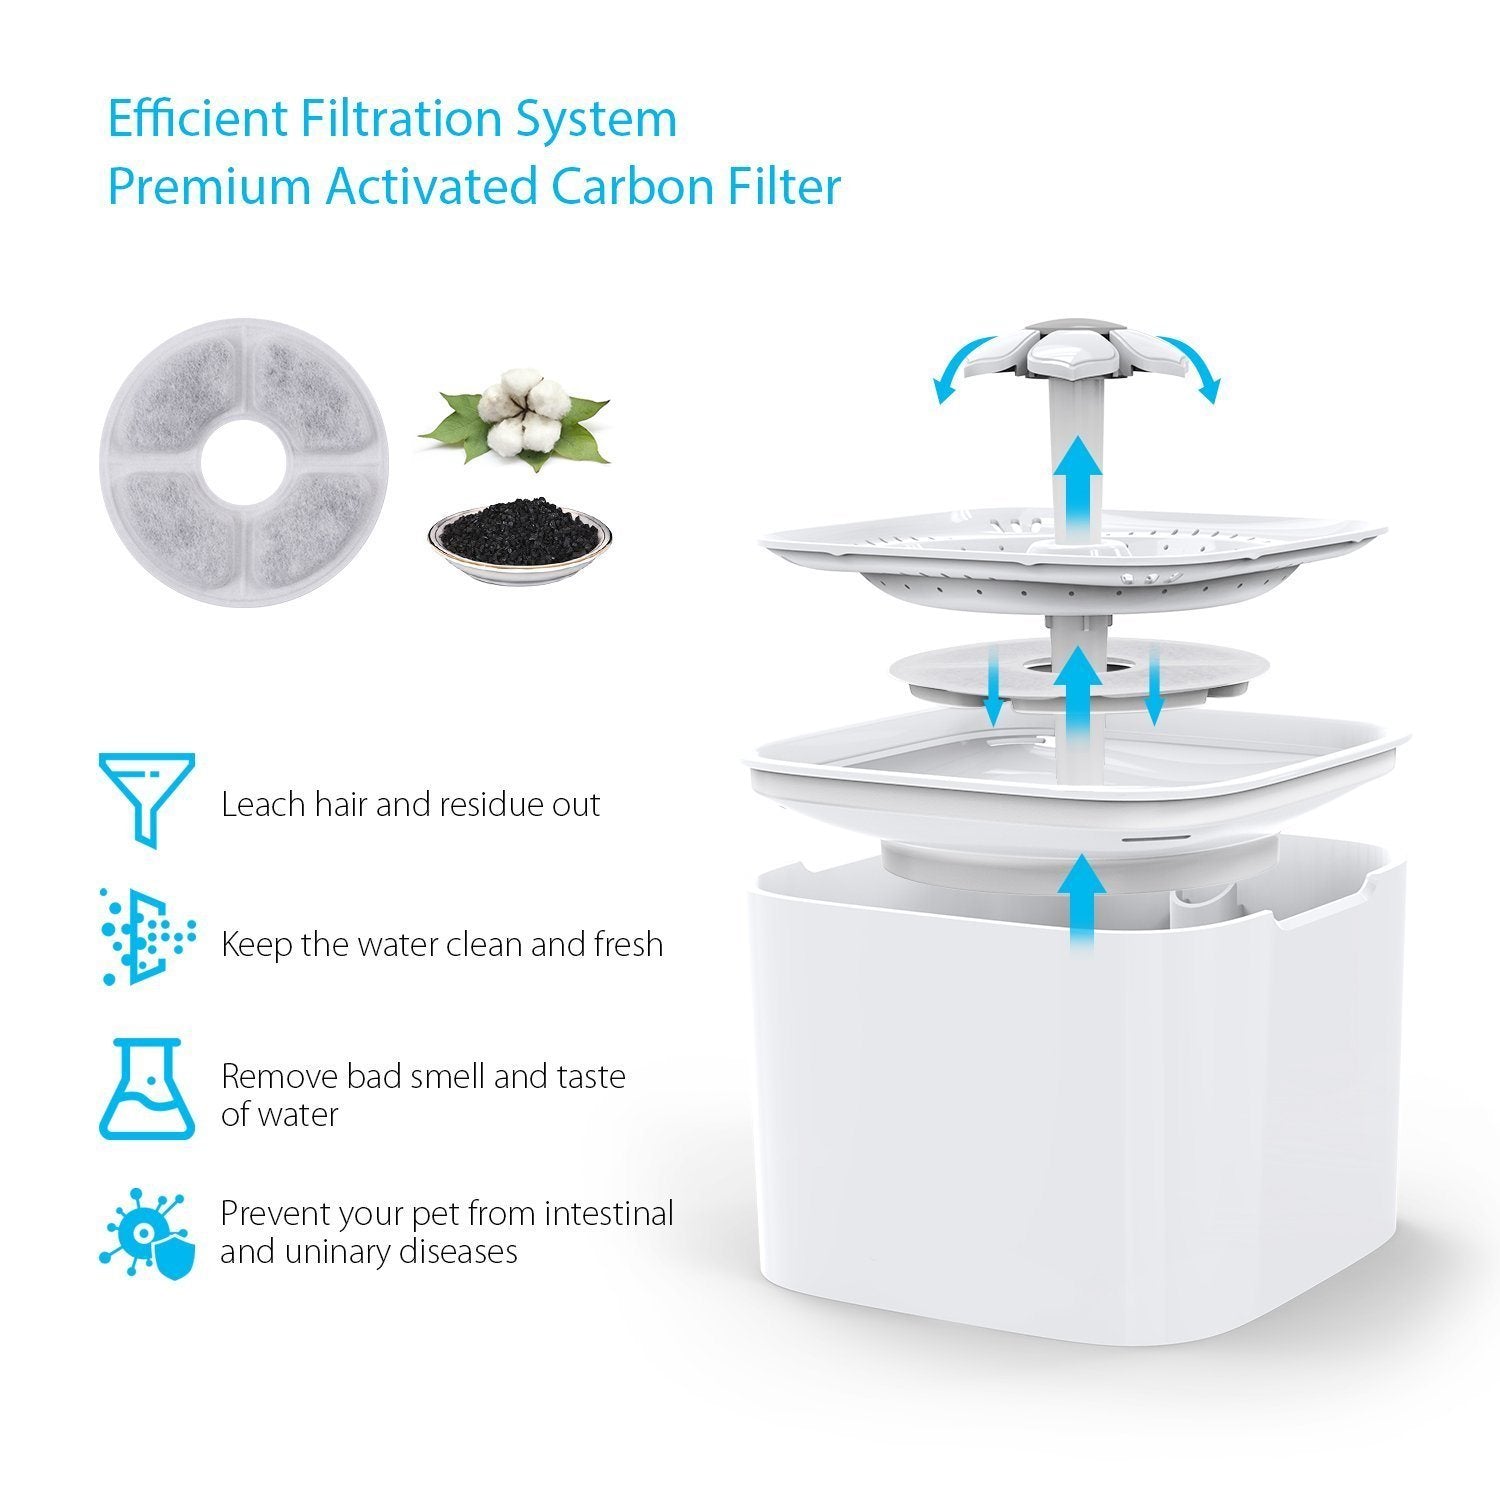 Automatic Water Dispenser Electric Water Bowl with Filter for Pets